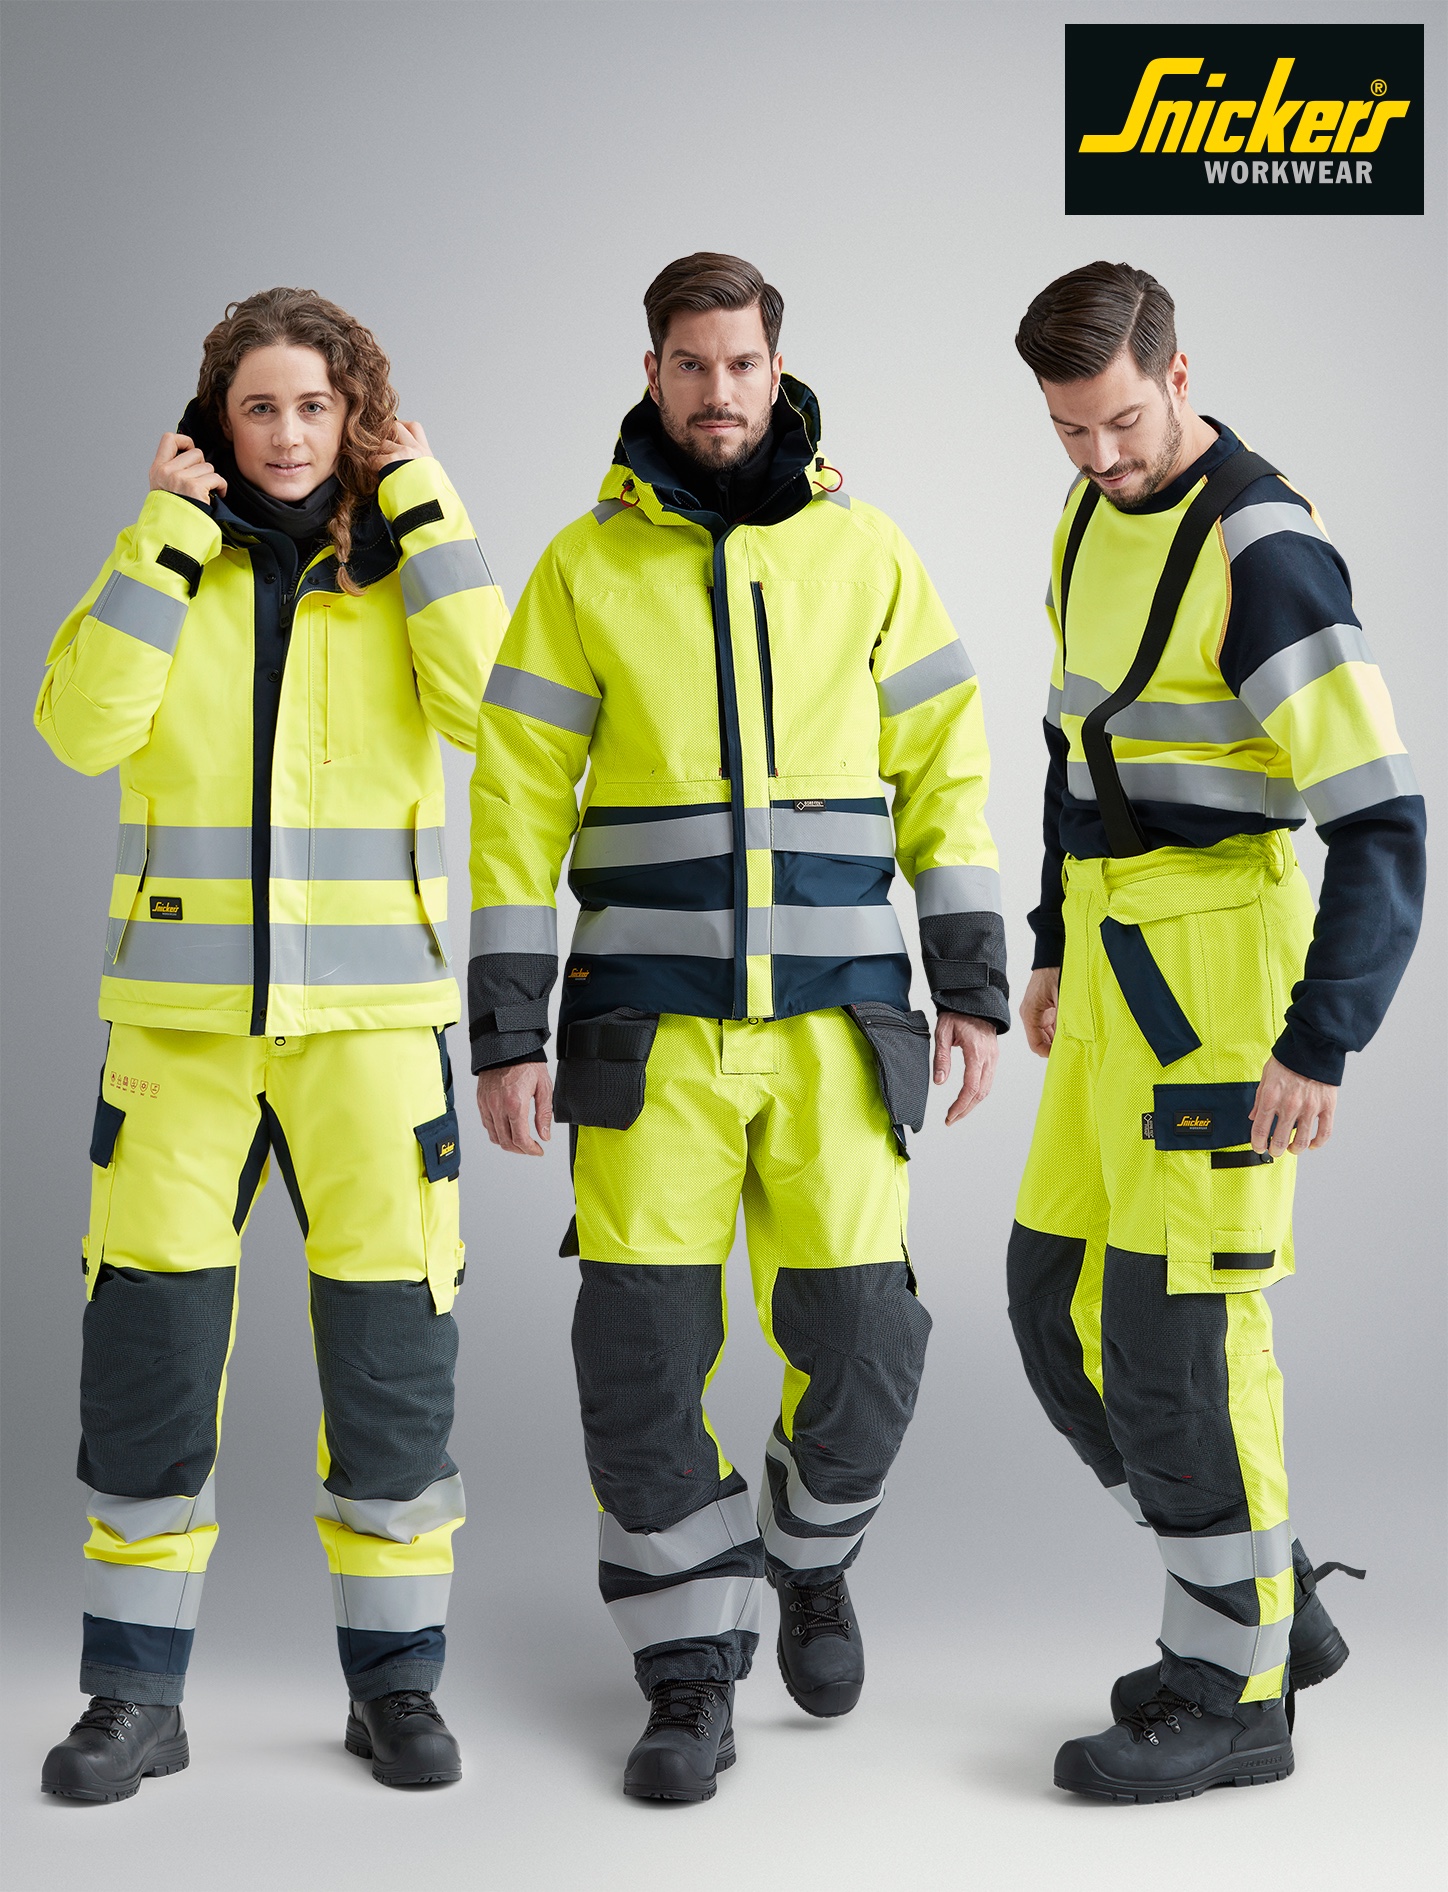 Stay Safe With Snickers Workwear Protective Wear Solutions For Men And Women Locksmith Journal